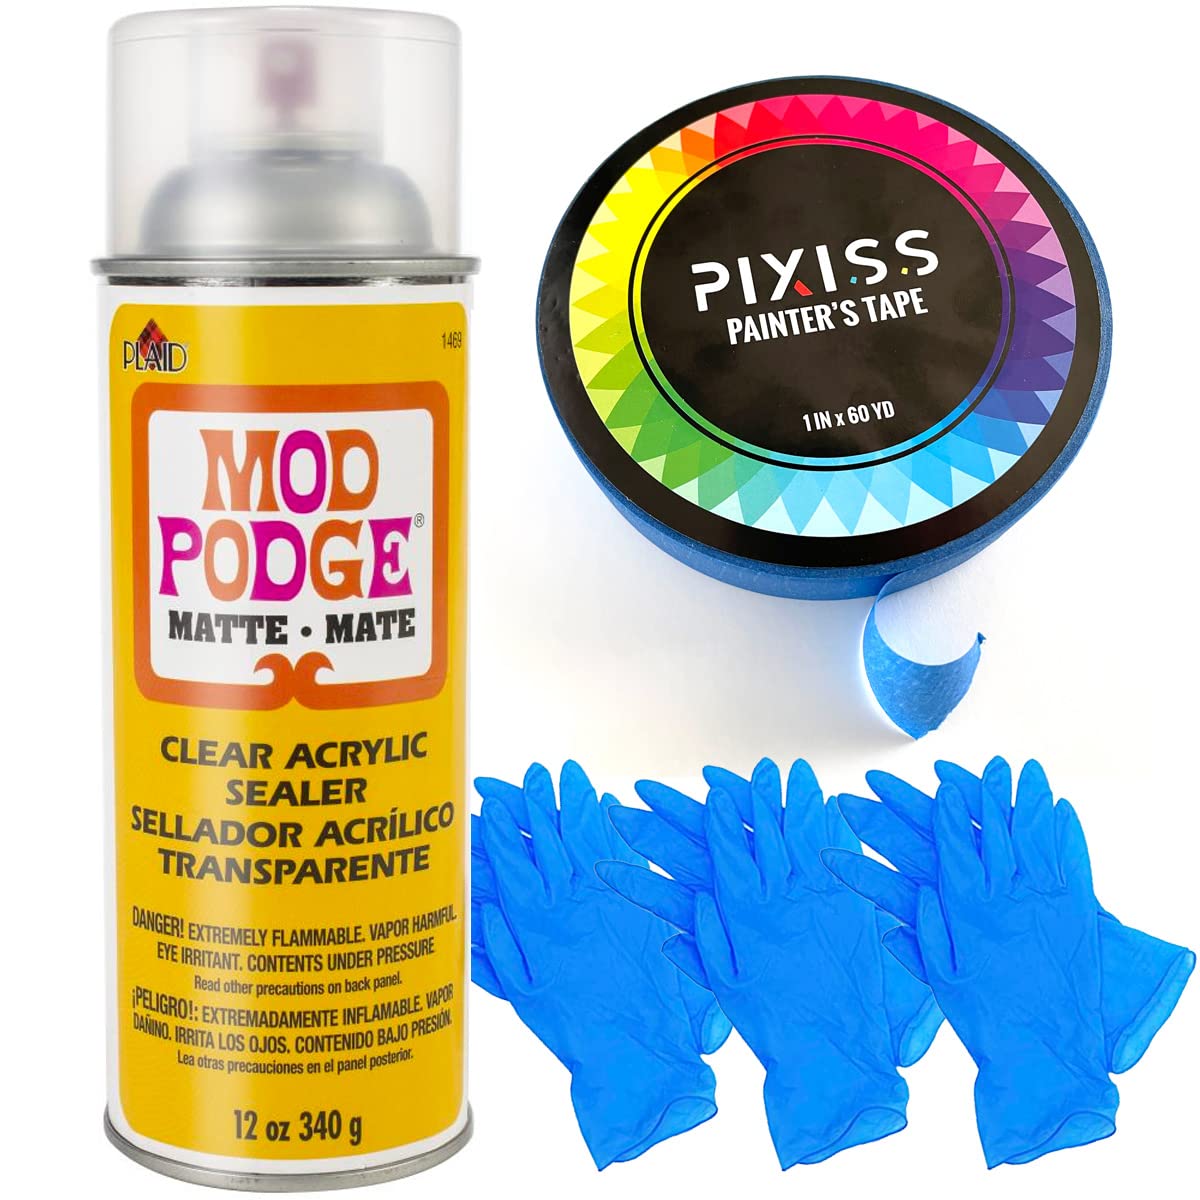  Mod Podge Spray Acrylic Sealer that is Specifically